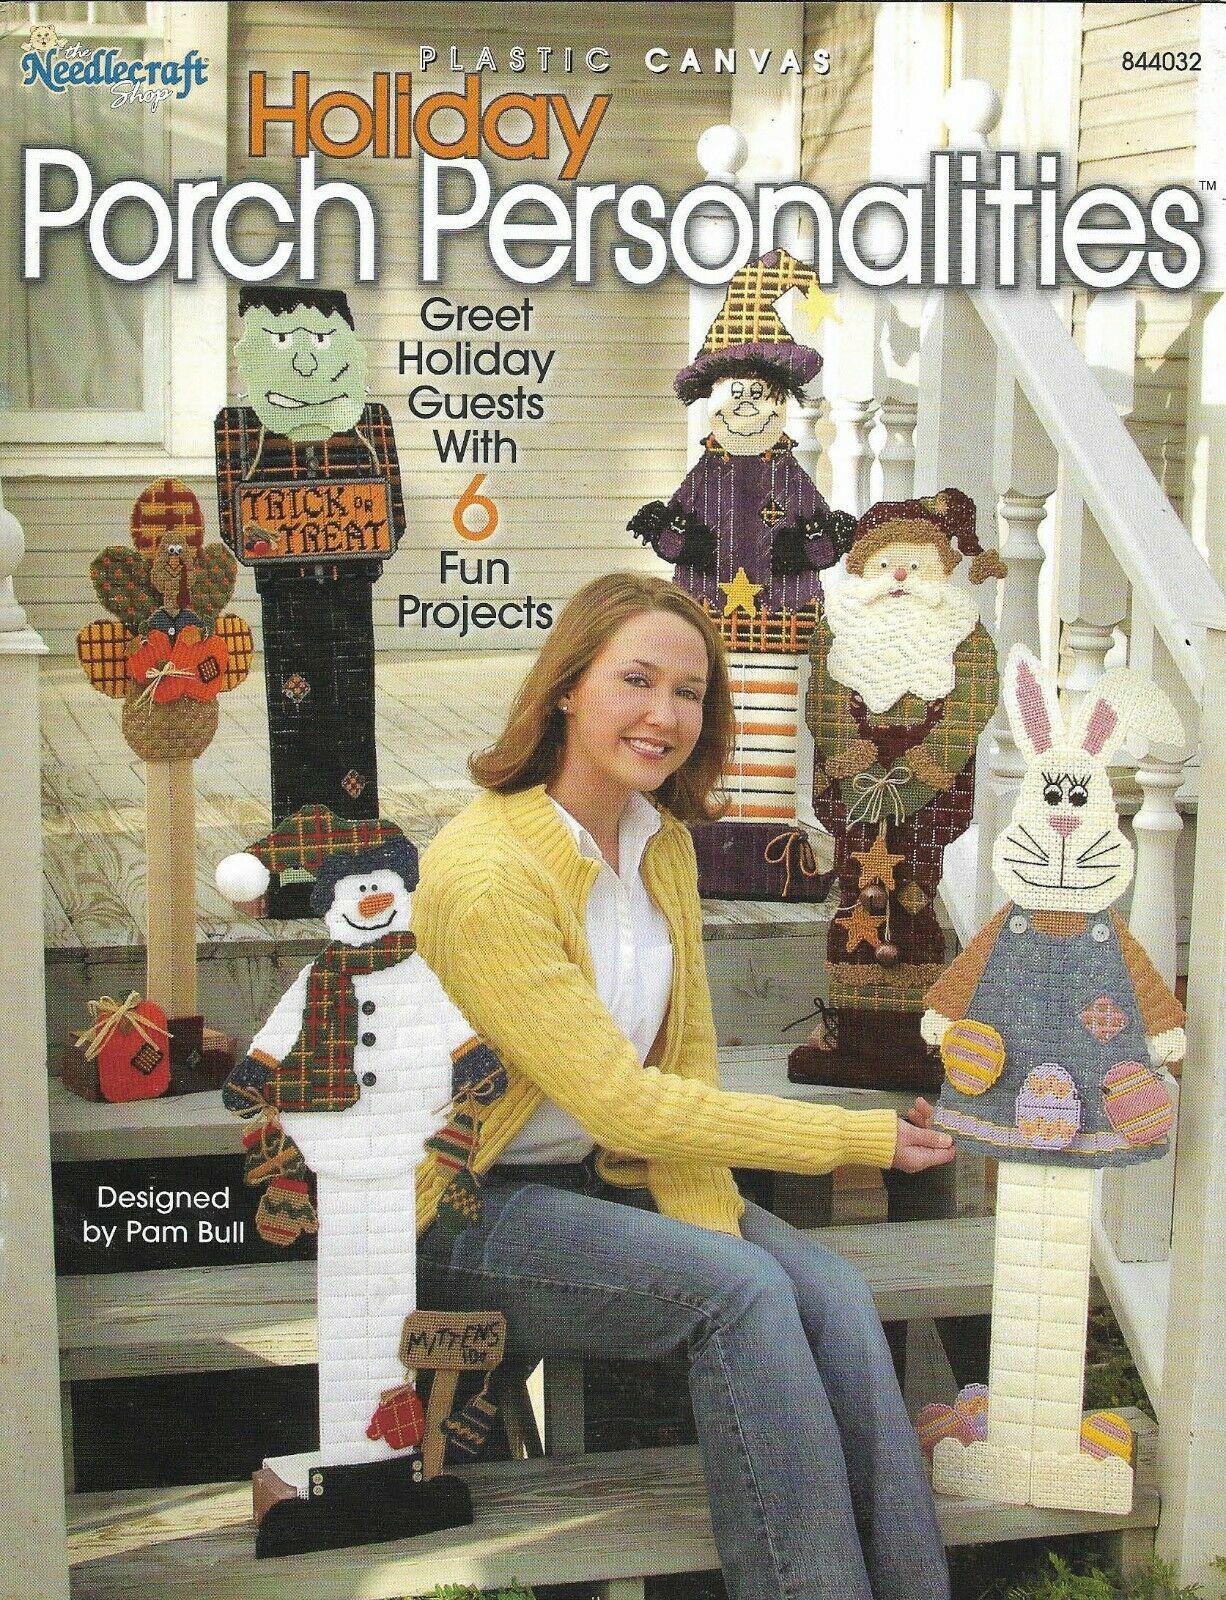 Used Holiday Porch Personalities Santa Witch Bunny Plastic Canvas Pattern Book